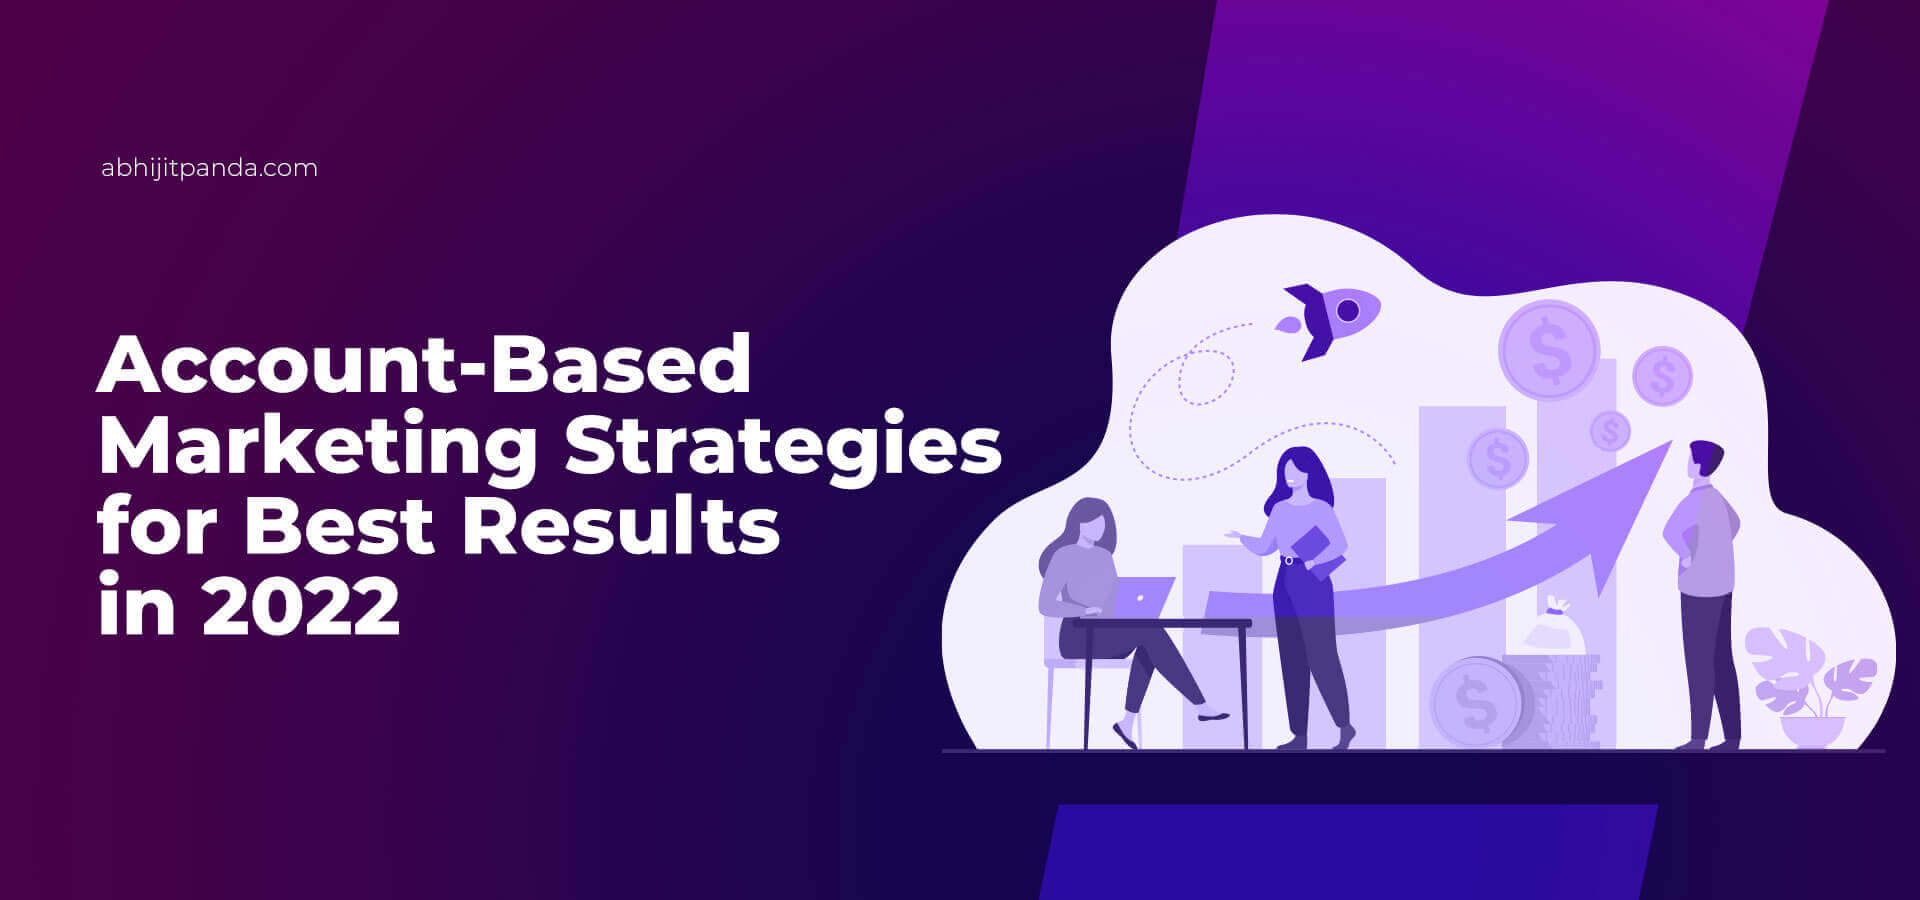 Account-Based Marketing Strategies for Best Results in 2022